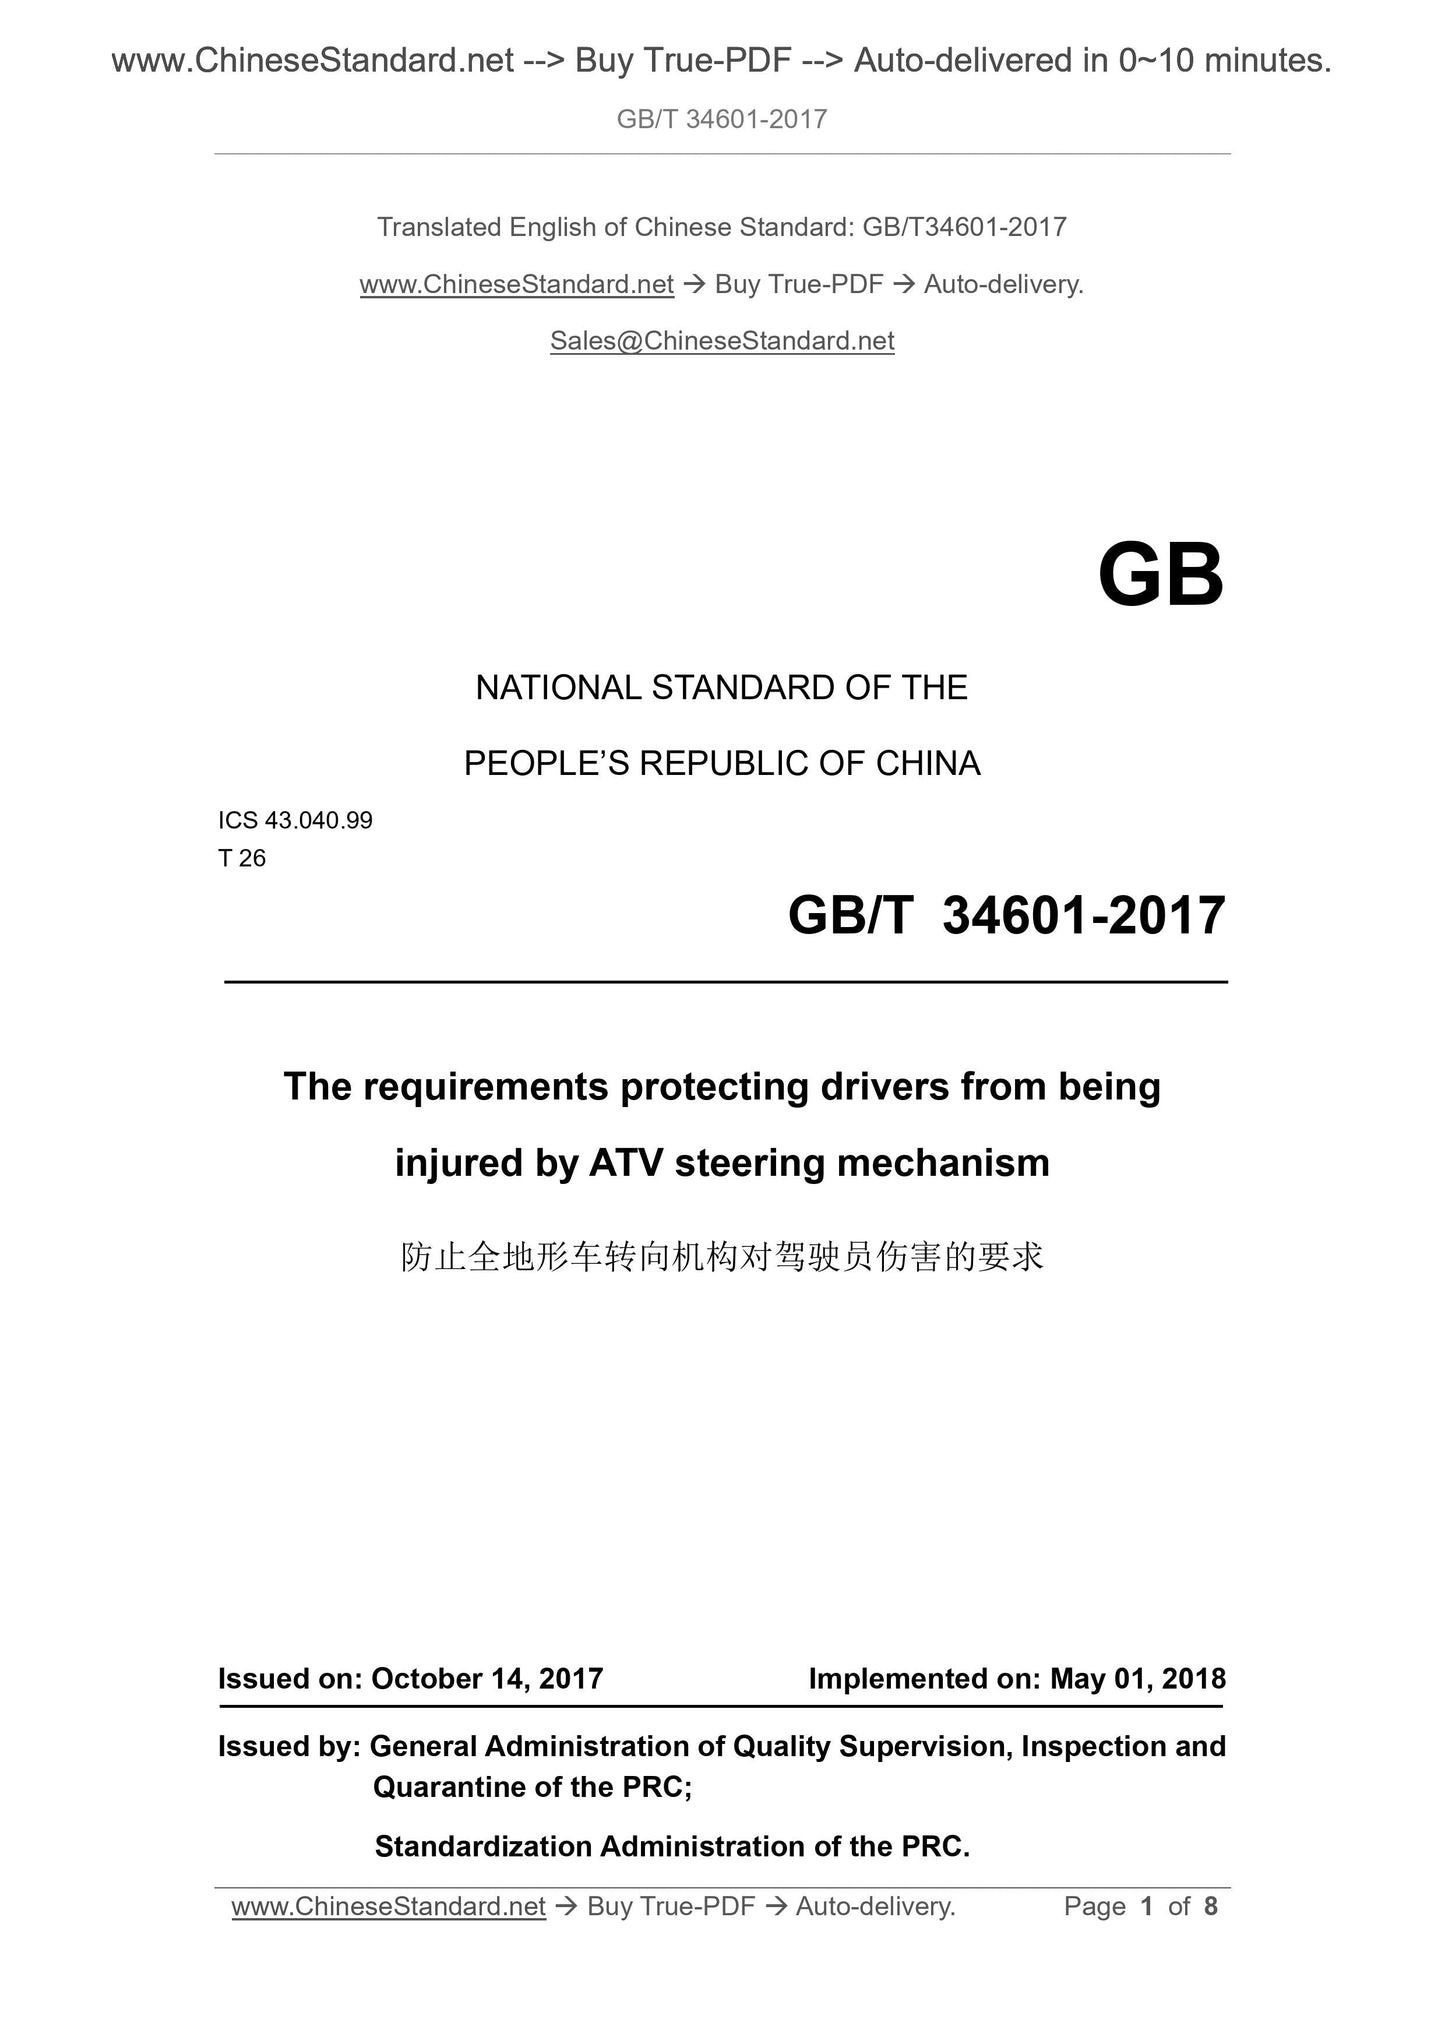 GB/T 34601-2017 Page 1